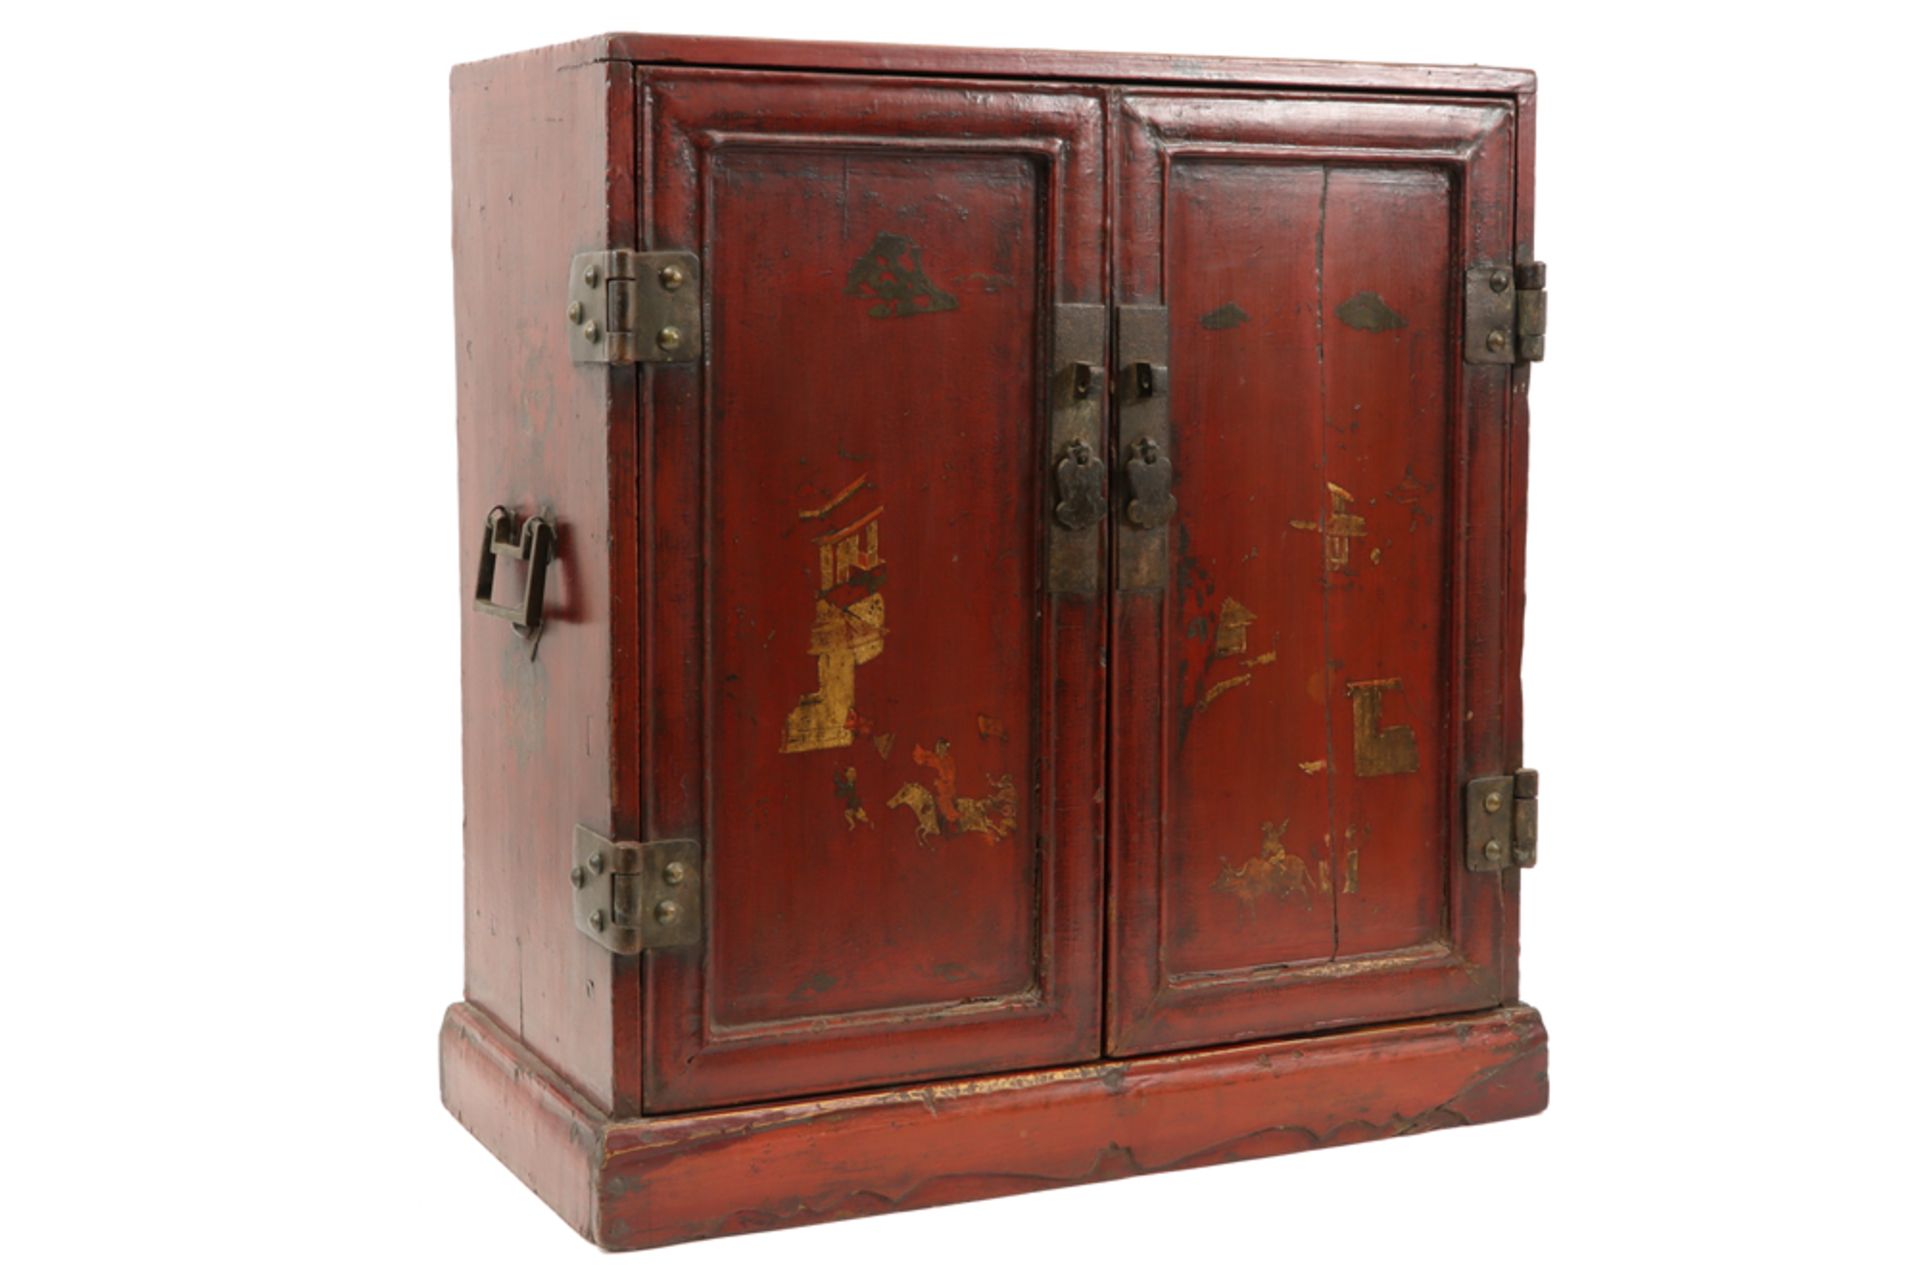 small antique Chinese altar cabinet in lacquered wood || Antiek Chinees altaarkabinetje in gelakt